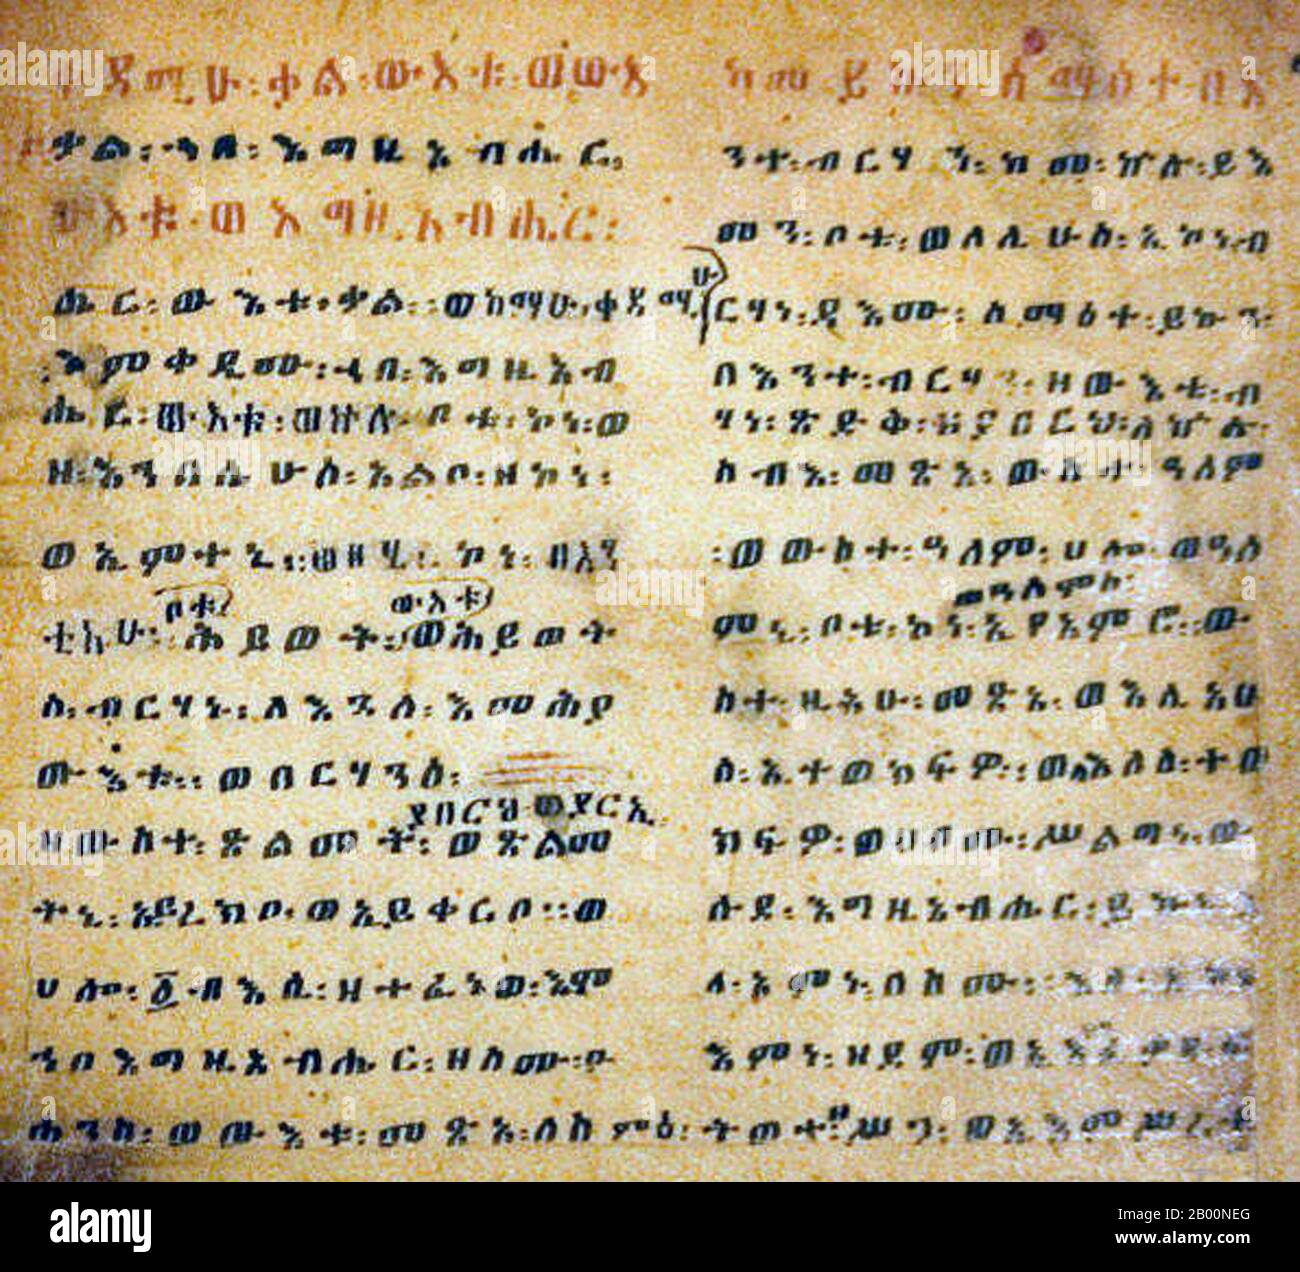 Ethiopia: Ge'ez script, Eliza Codex, Ethiopian Biblical Manuscript, 16th century.  Ge'ez (also transliterated Gi'iz, and less precisely called Ethiopic) is an ancient South Semitic language that developed in the northern region of Ethiopia and southern Eritrea in the Horn of Africa. It later became the official language of the Kingdom of Aksum and Ethiopian imperial court. Ge'ez is written with Ethiopic or the Ge'ez abugida, a script that was originally developed specifically for this language. In languages that use it, such as Amharic and Tigrinya, the script is called Fidäl. Stock Photo